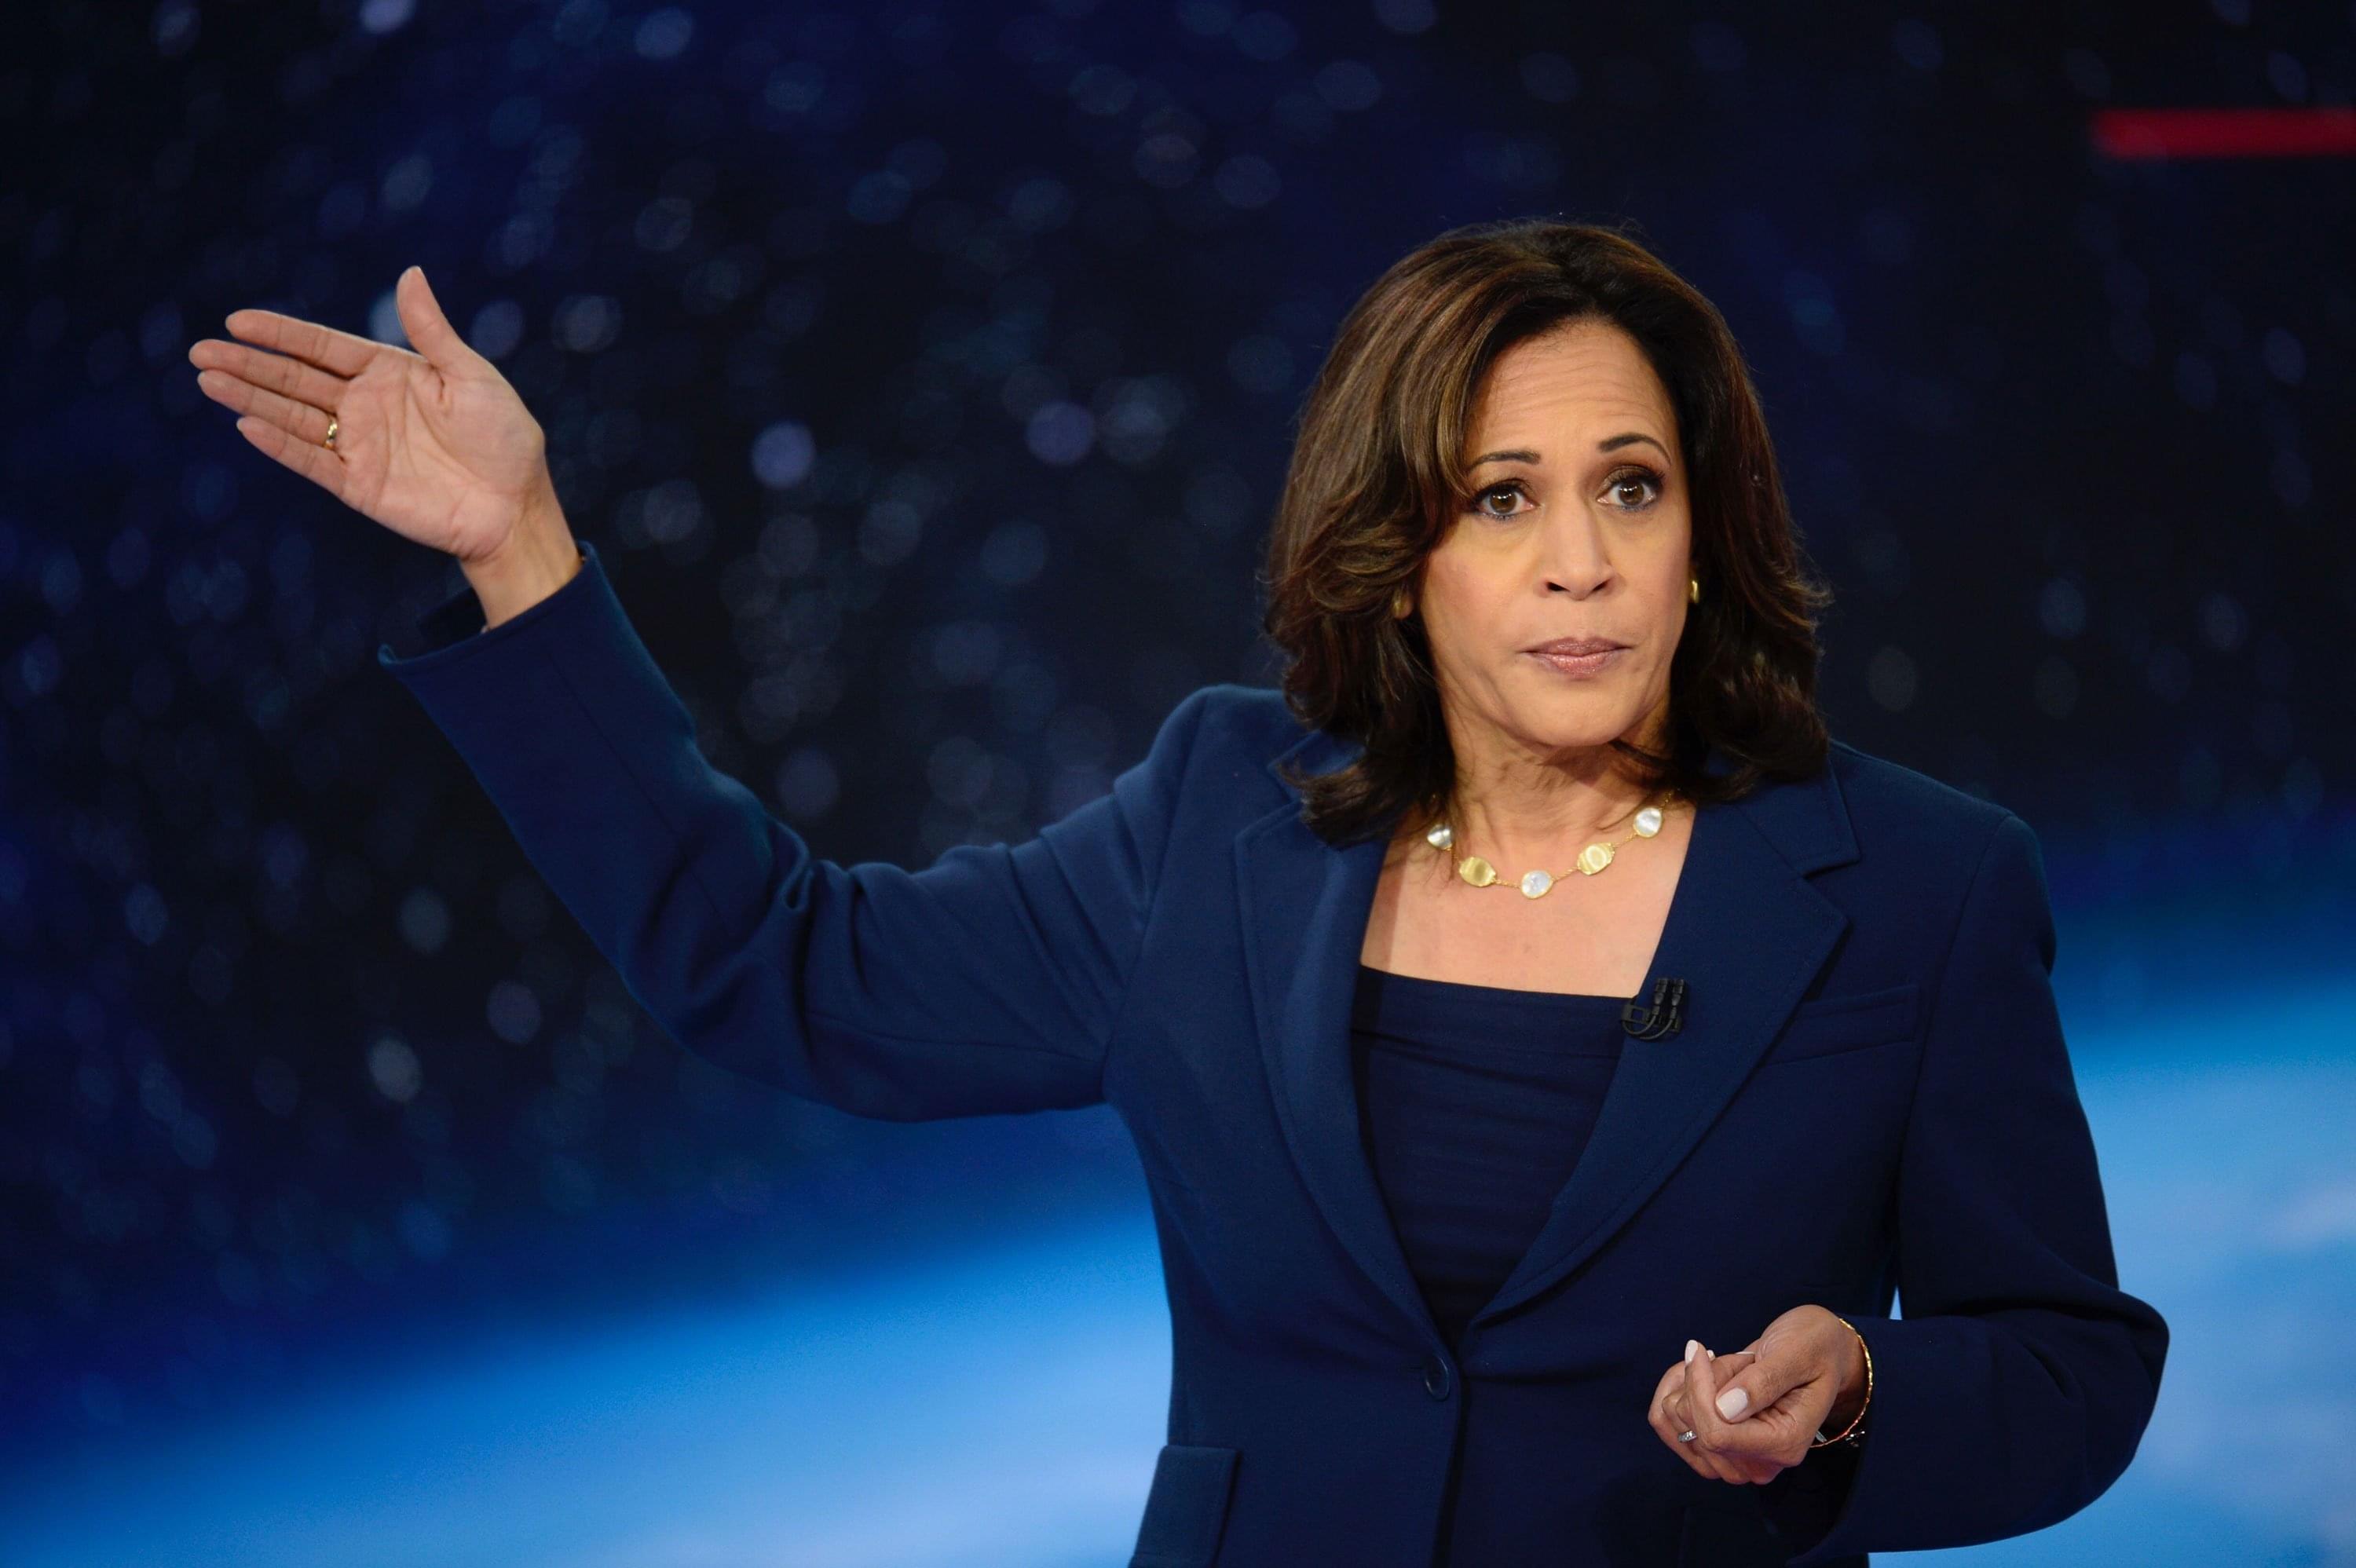 Harris Has Support of Enough Democratic Delegates to Become Party’s Presidential Nominee: AP Survey